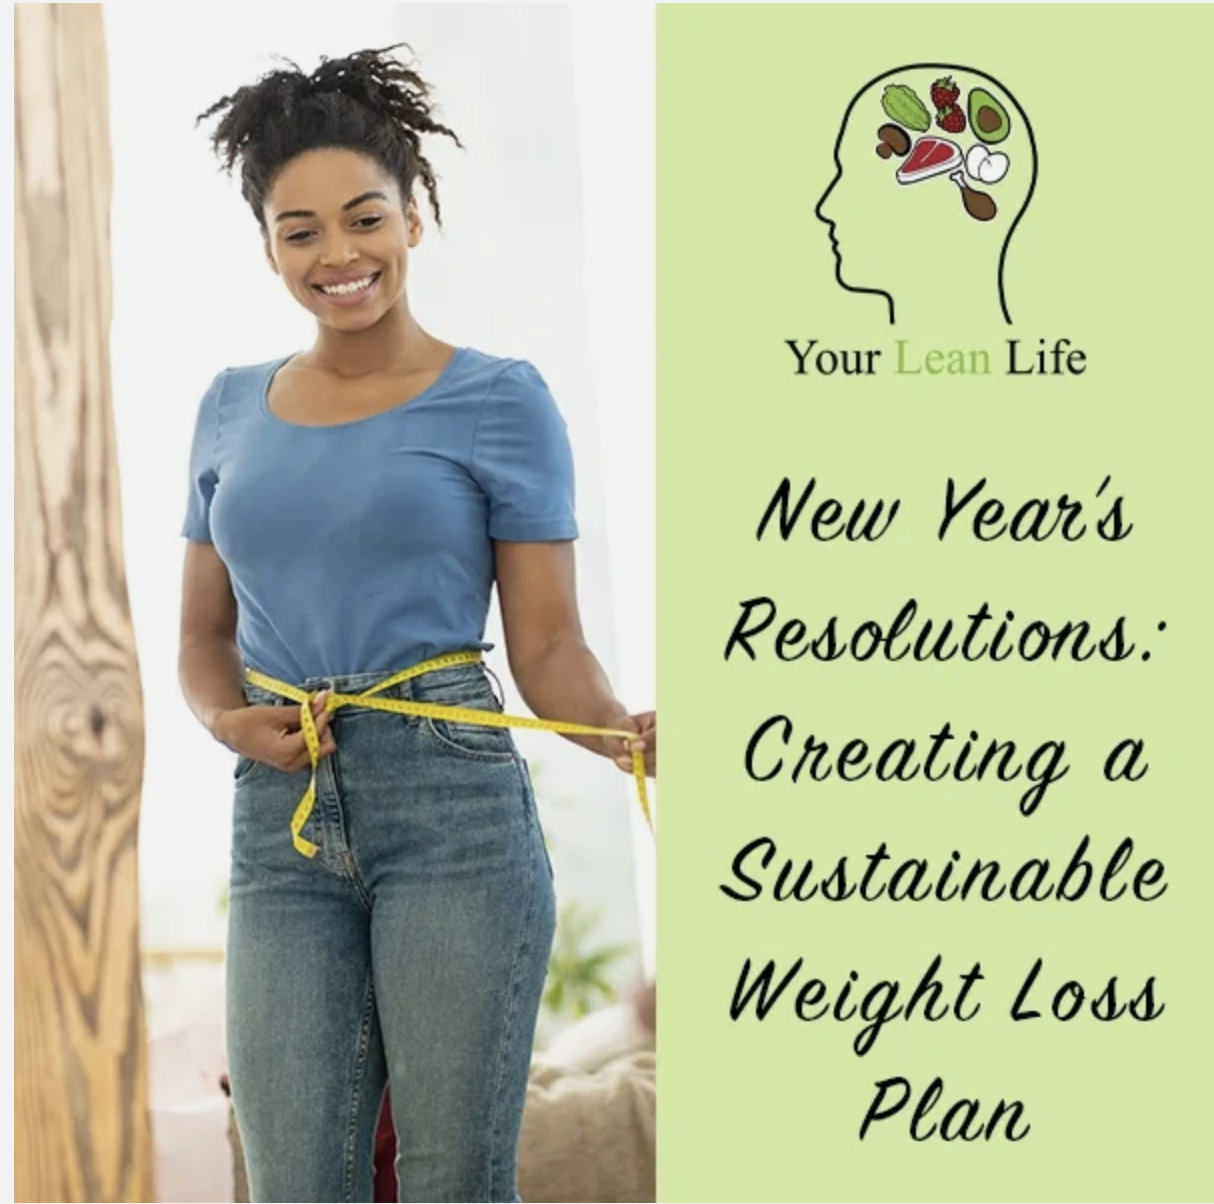 New Year’s Resolutions: Creating a Sustainable Weight Loss Plan